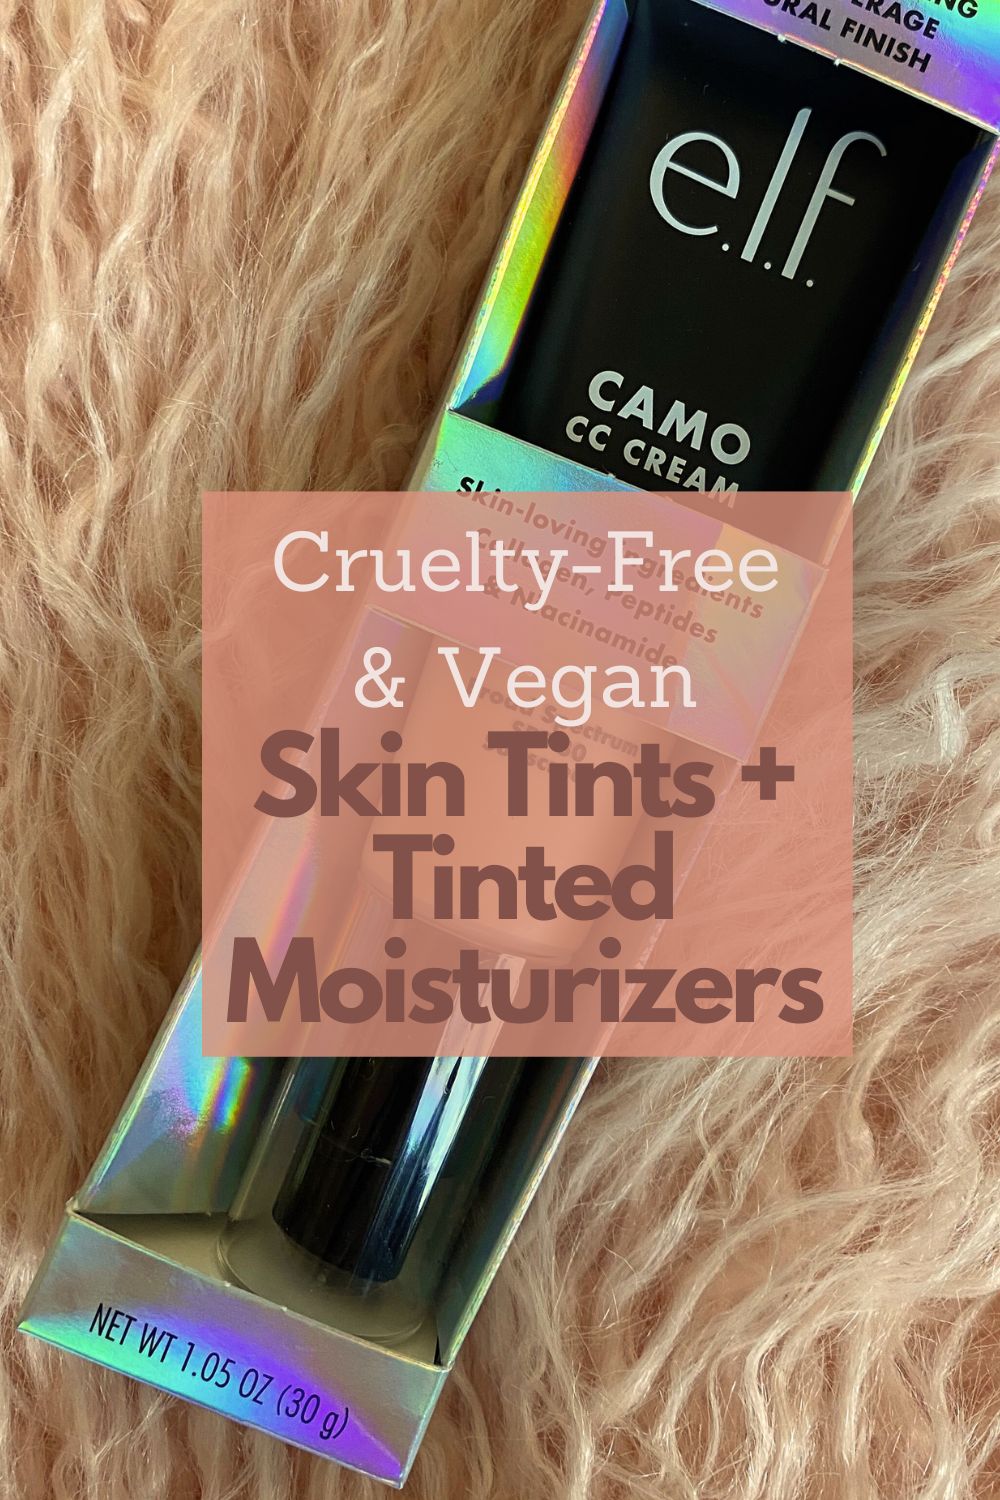 Cruelty-Free and Vegan Tinted Moisturizers and Skin Tints